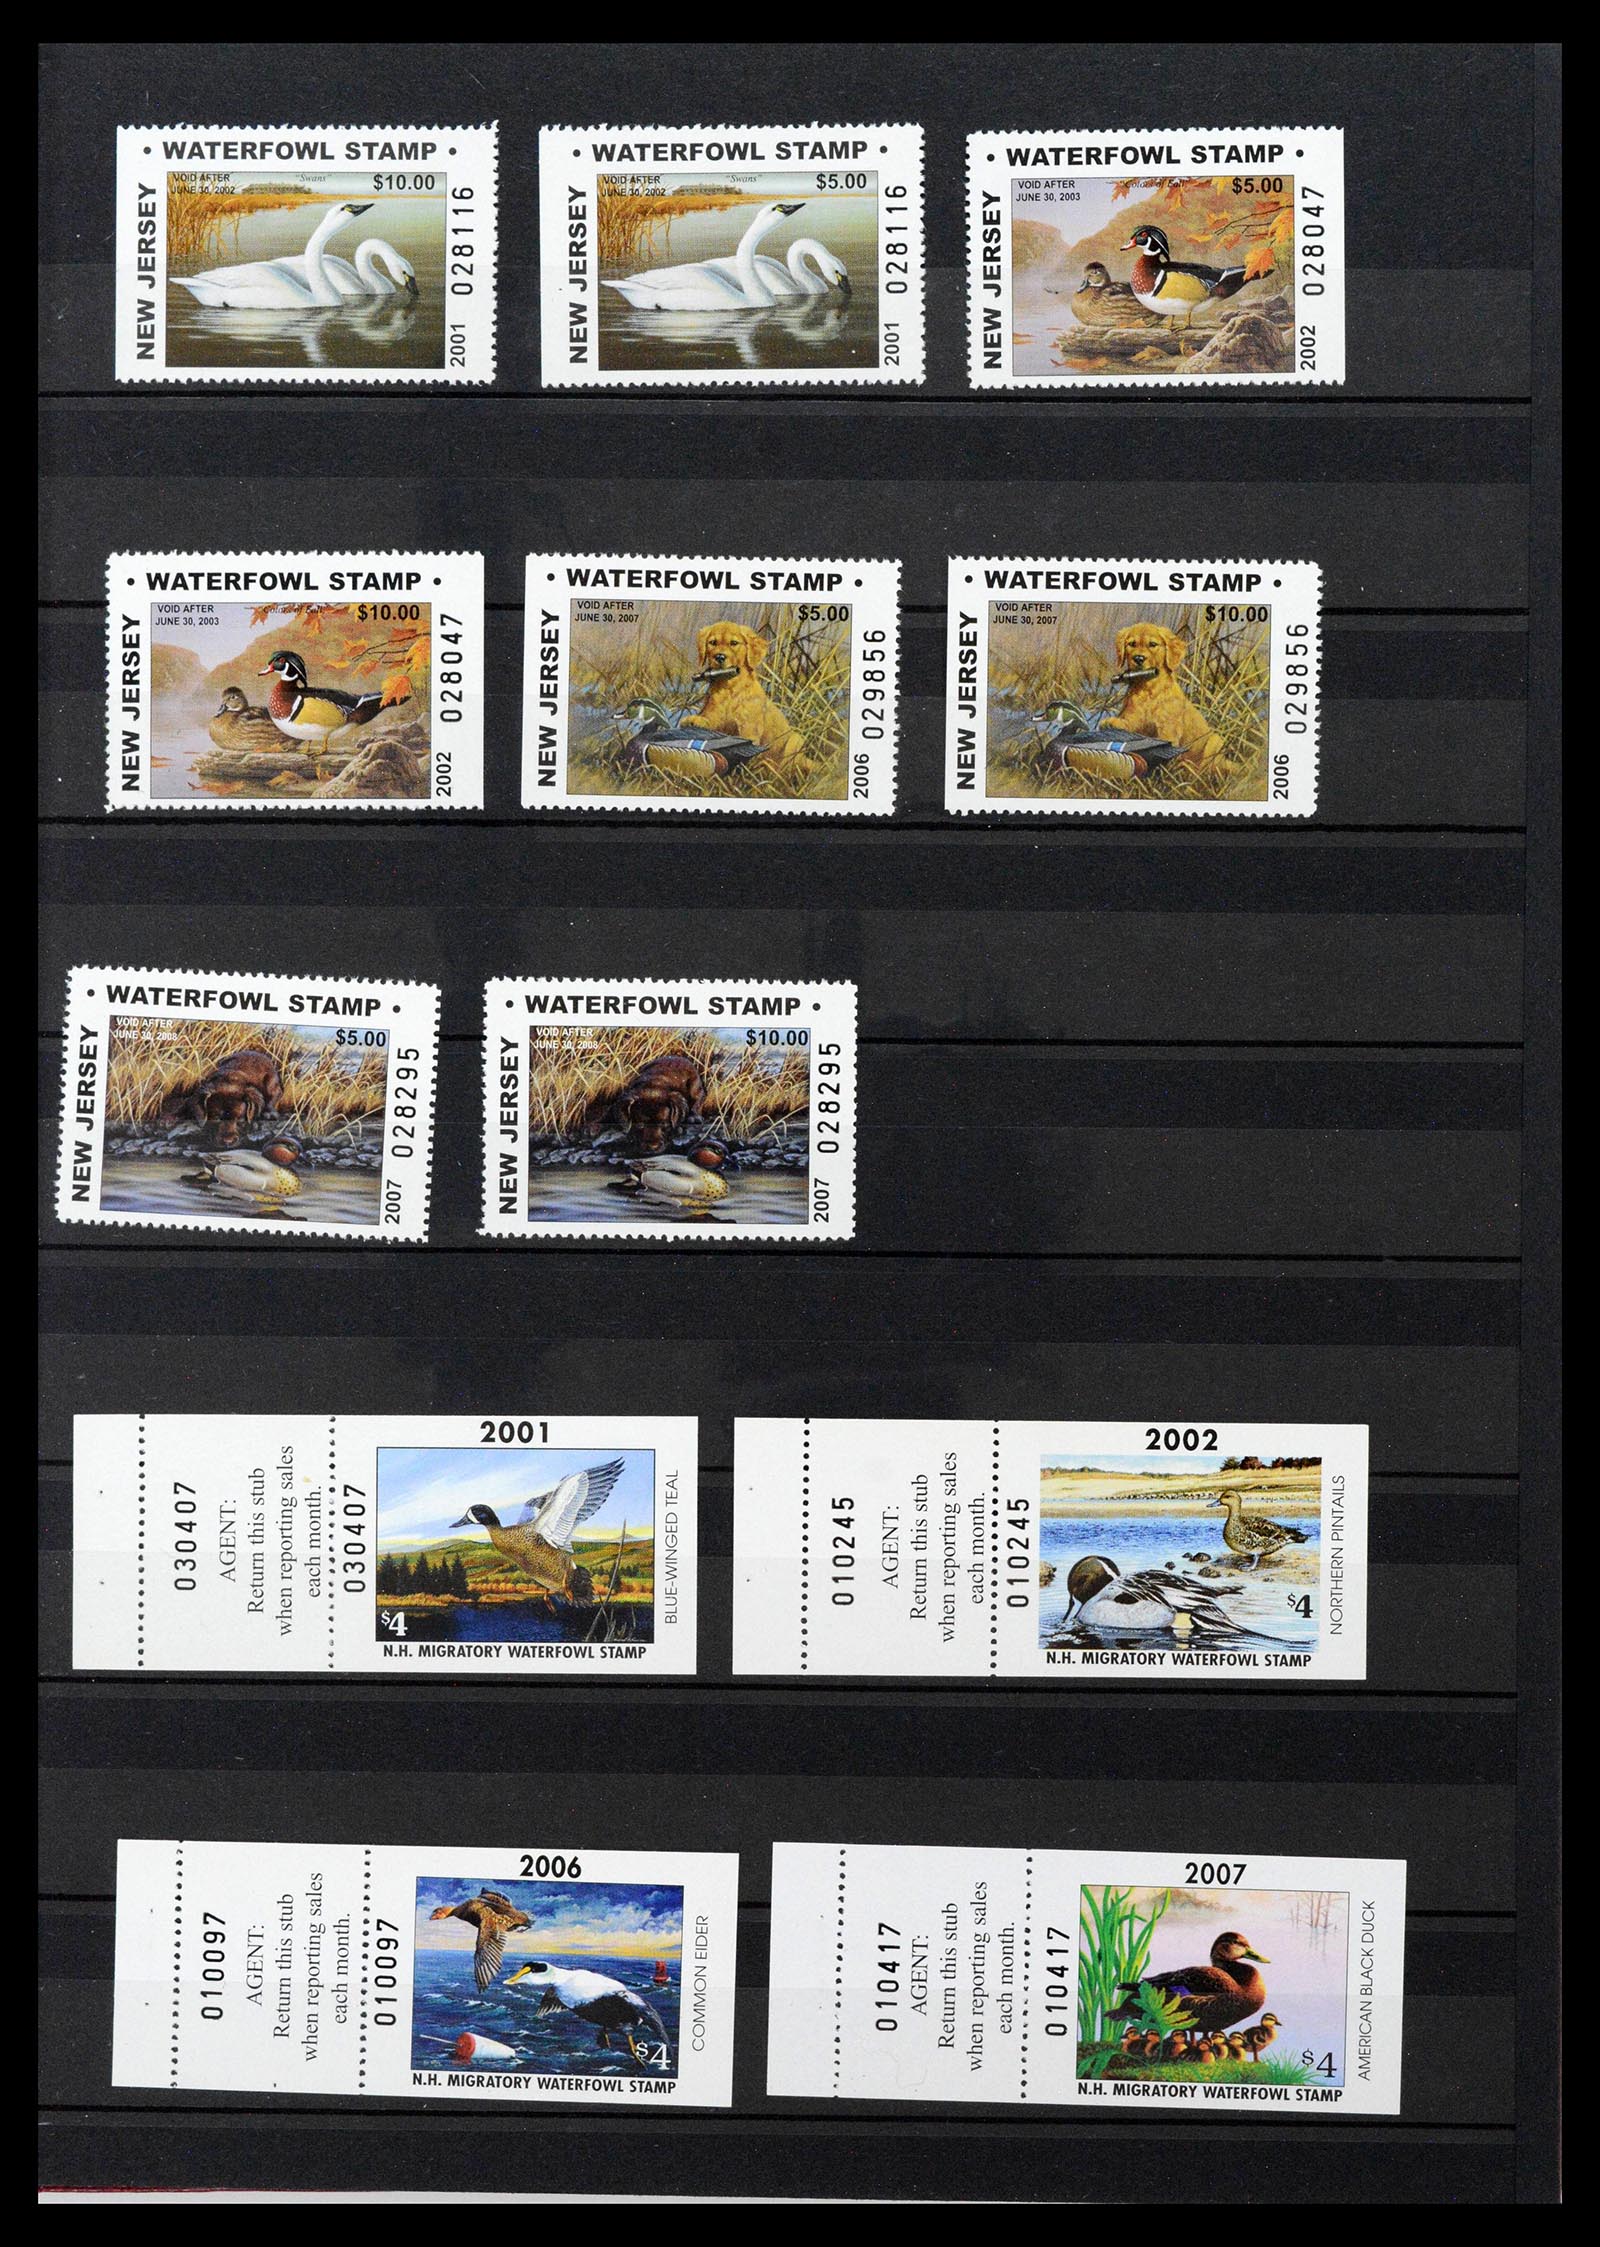 39426 0015 - Stamp collection 39426 USA duckstamps 1934-2007.